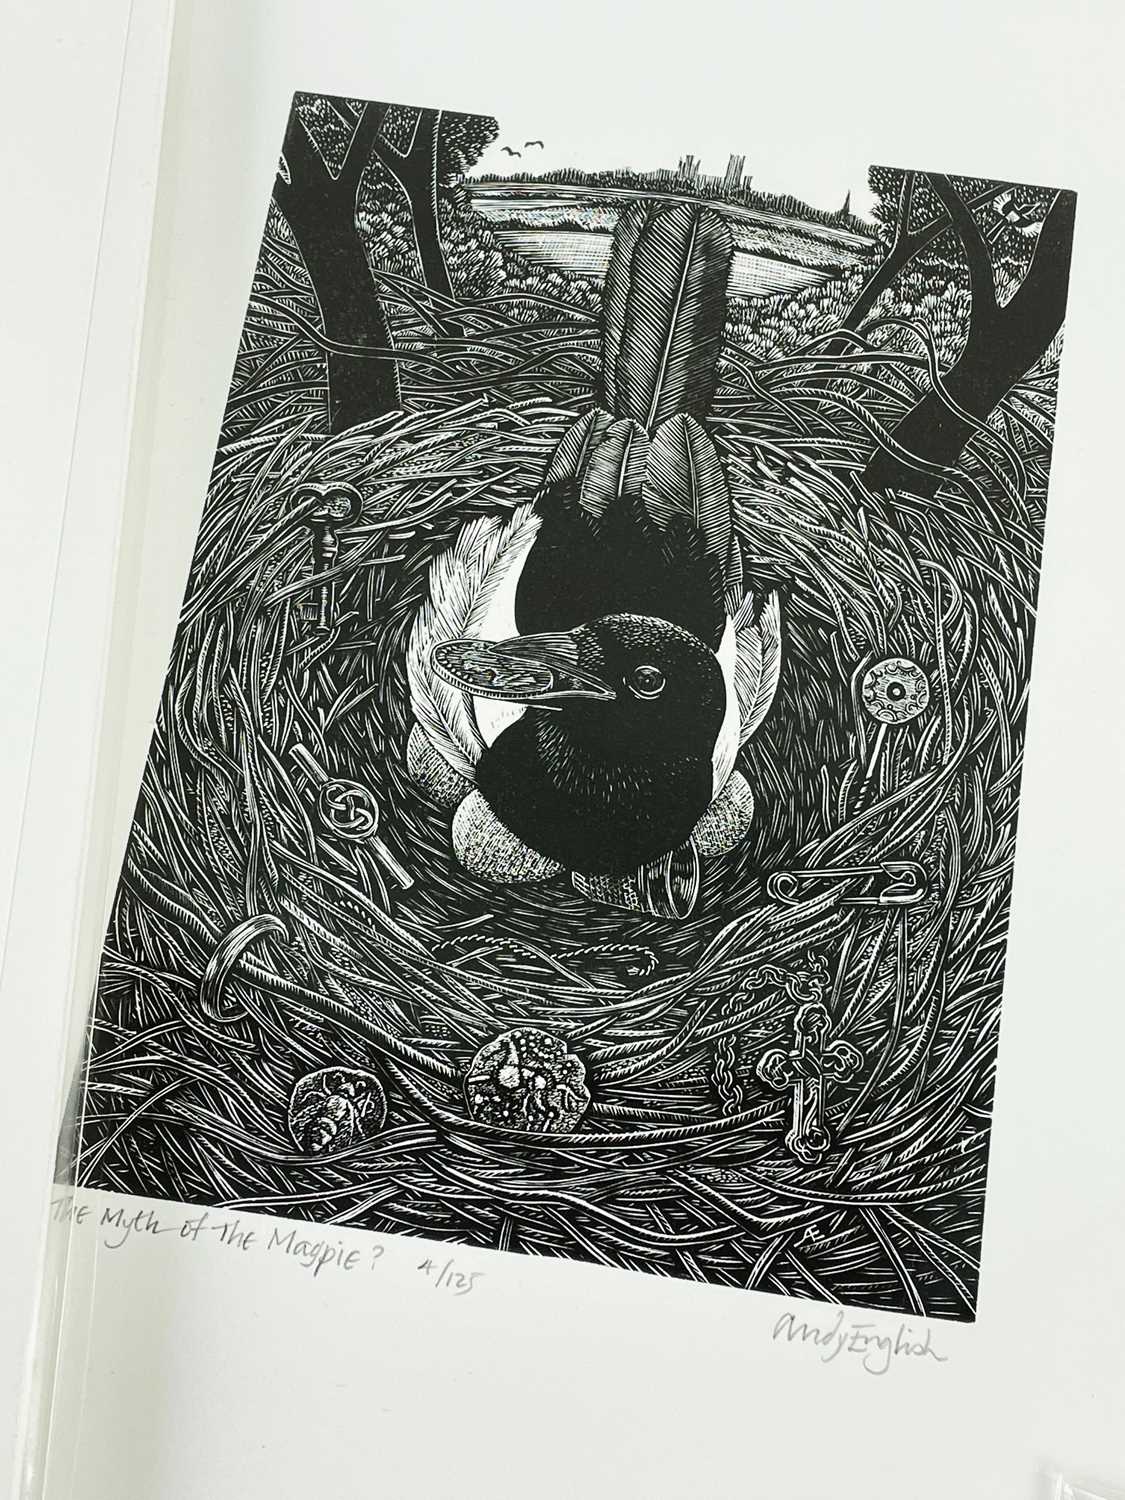 ‡ AFTER ANDY ENGLISH nine limited edition monochrome prints - 'Myth of the Magpie?' 4/125, (I) 17. - Image 8 of 10